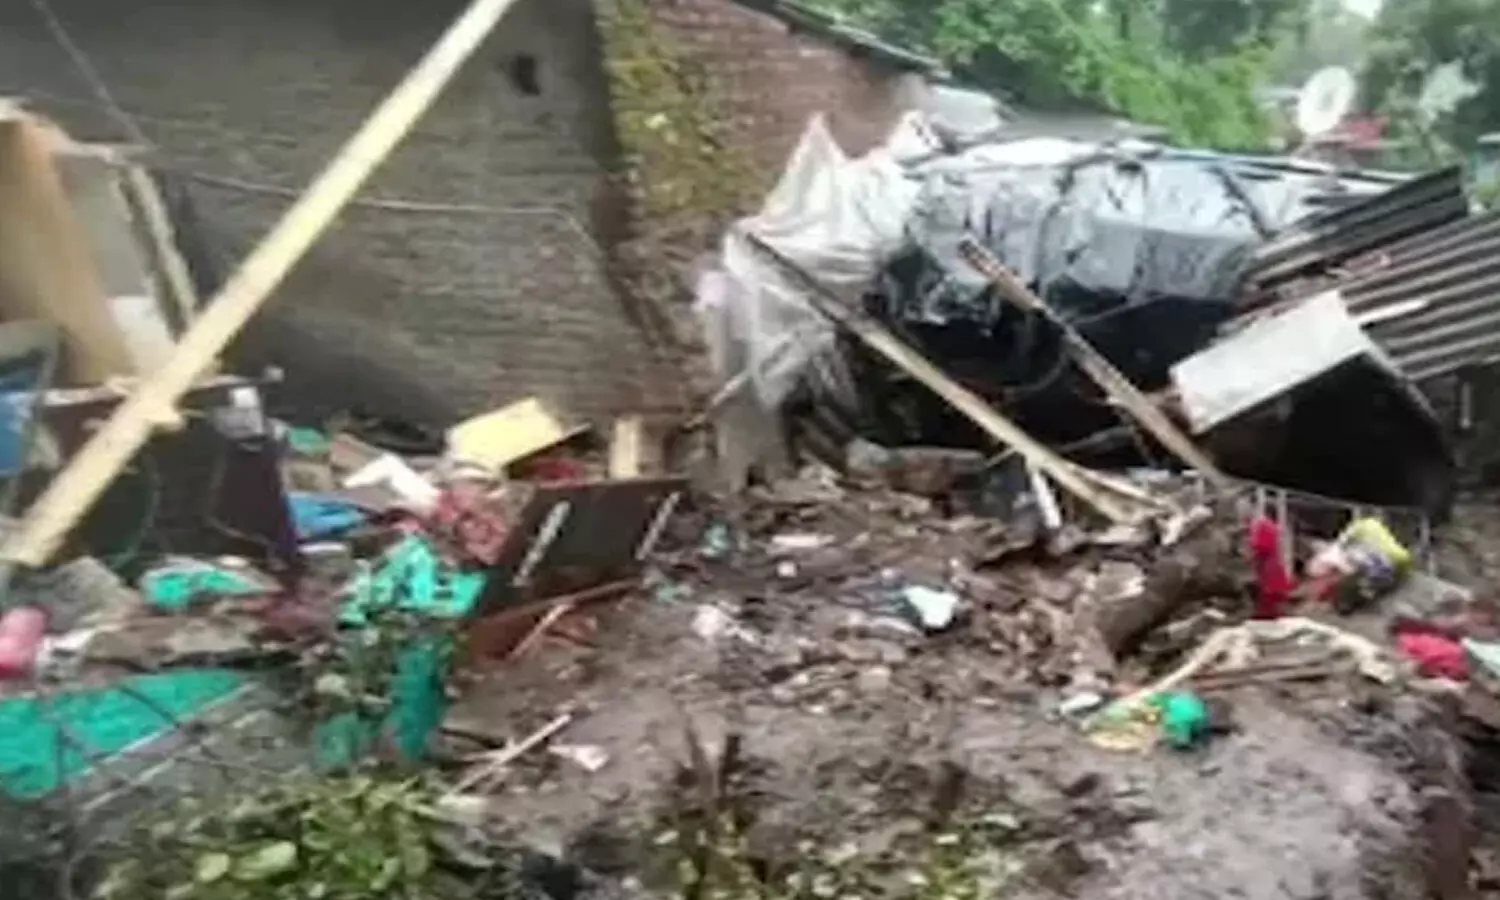 Mumbai Rains: Rescue Underway, 15 people died after wall collapse in Chembur